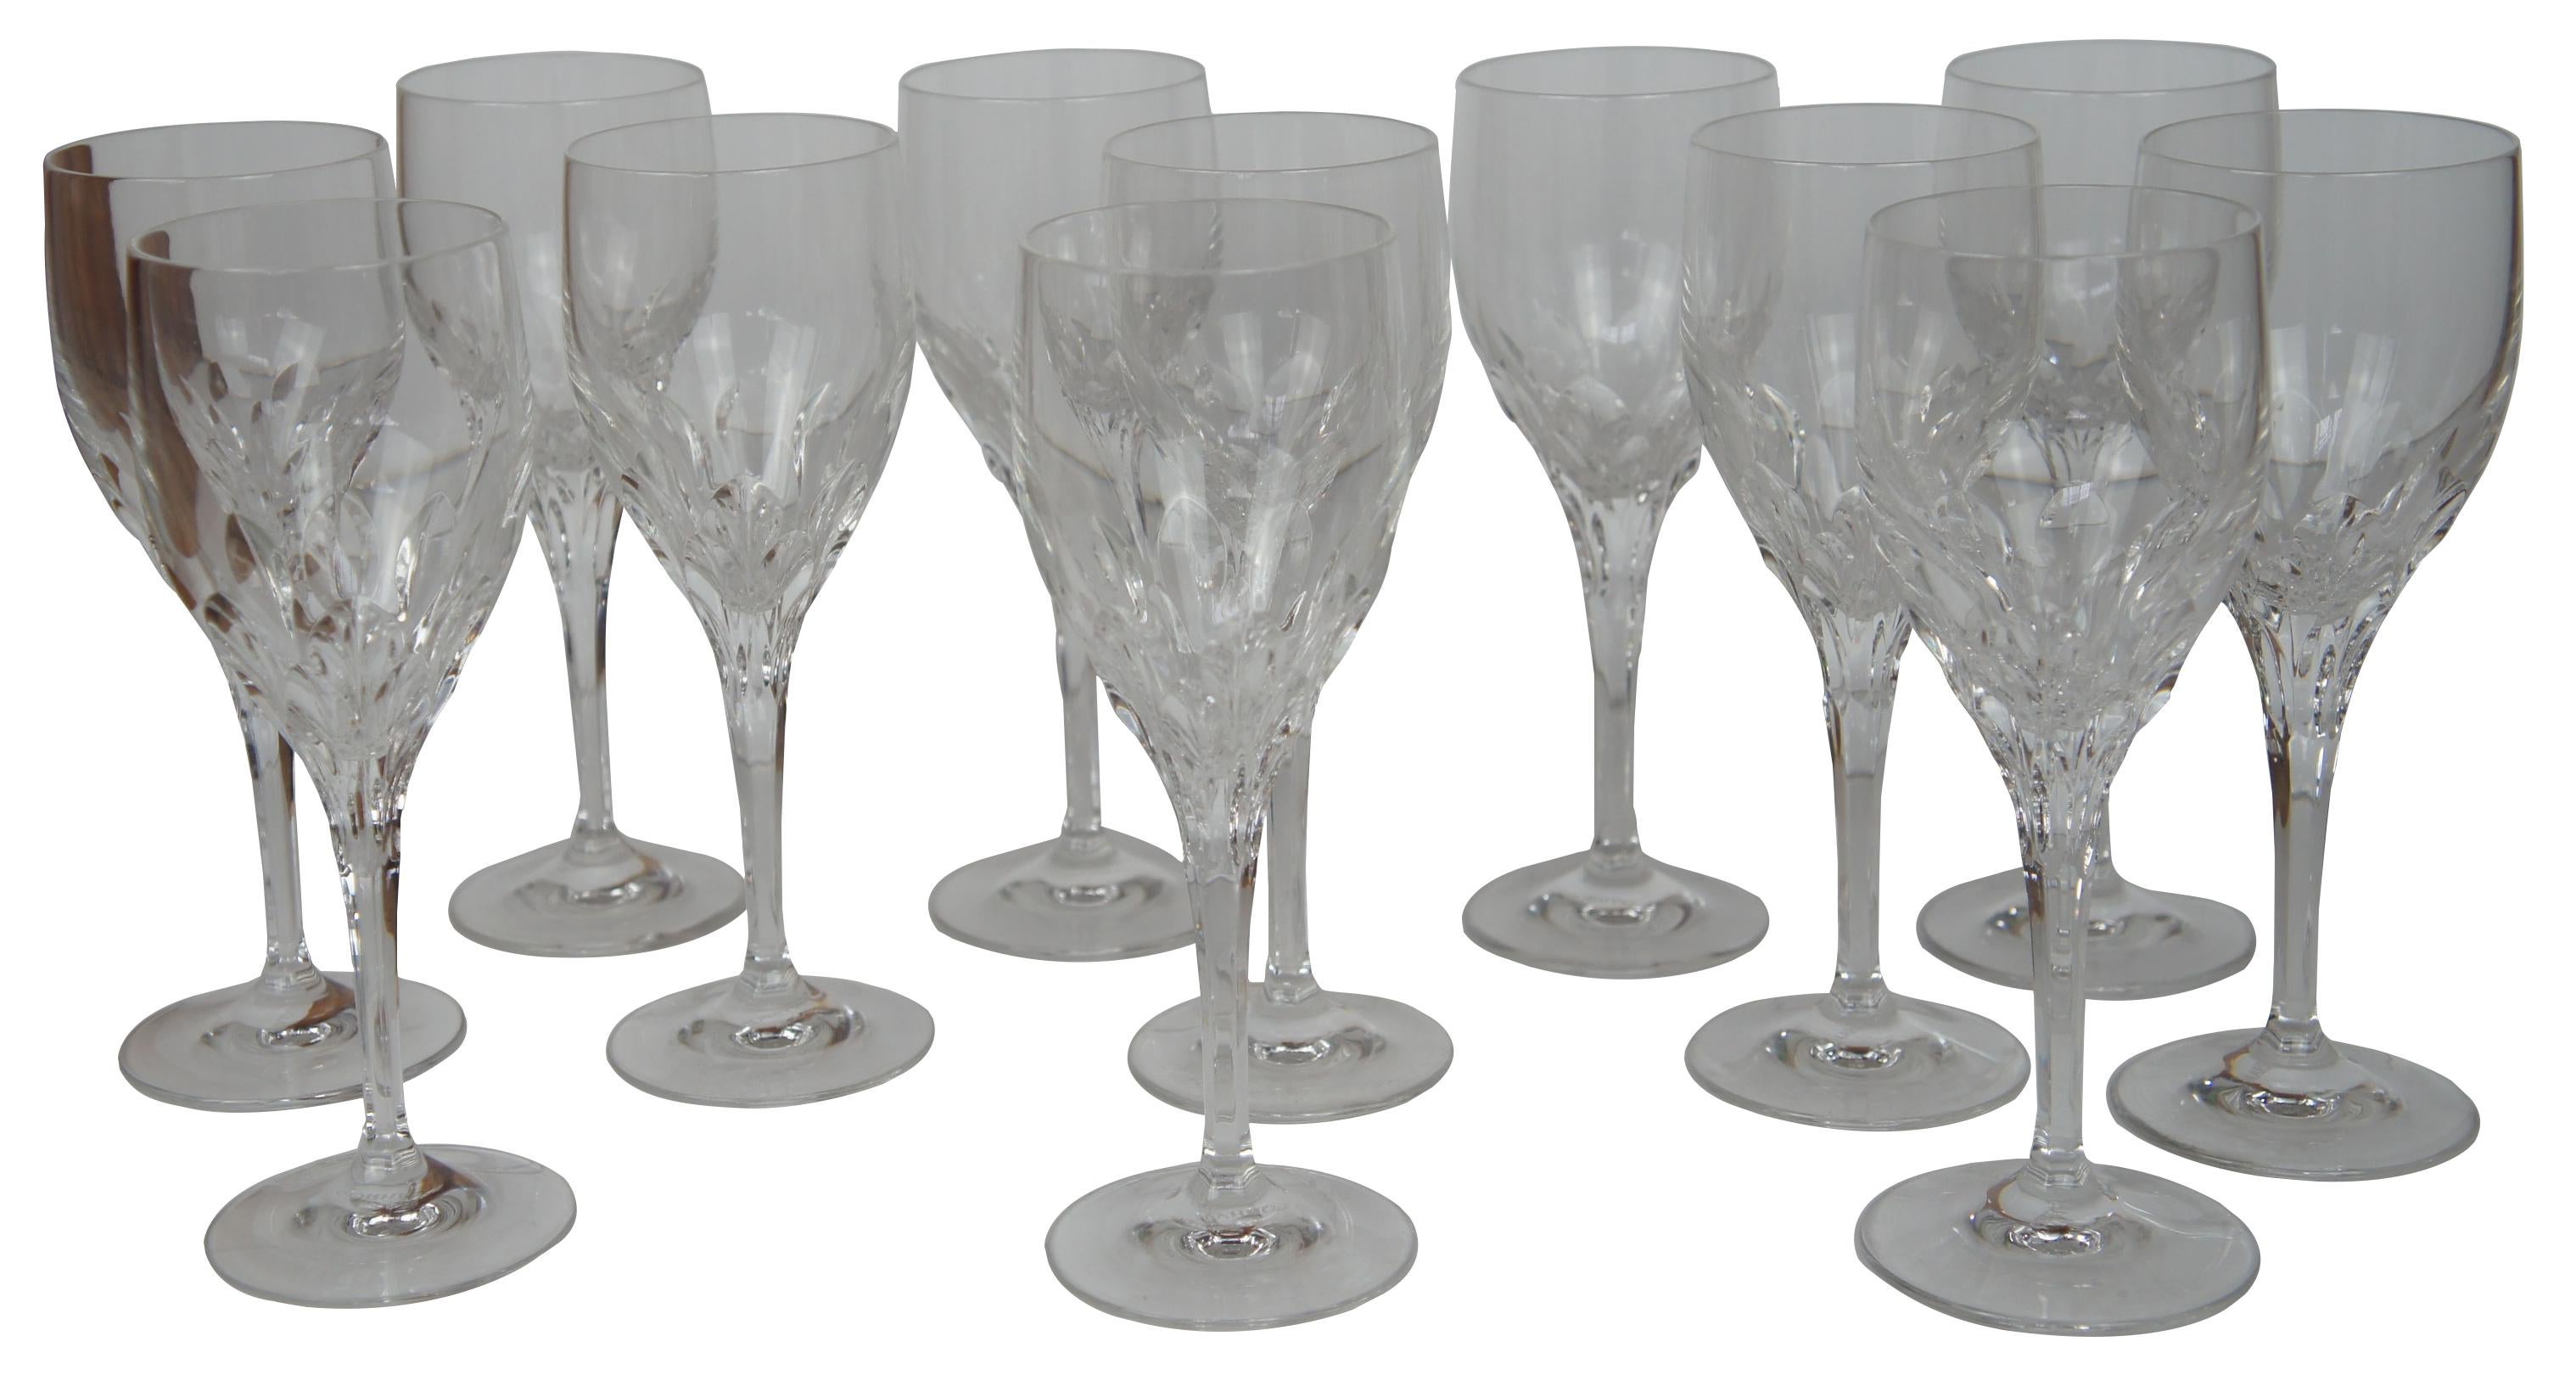 12 Gorham cut crystal diamond pattern goblets, perfect for water, wines or iced tea. Size: 7.5